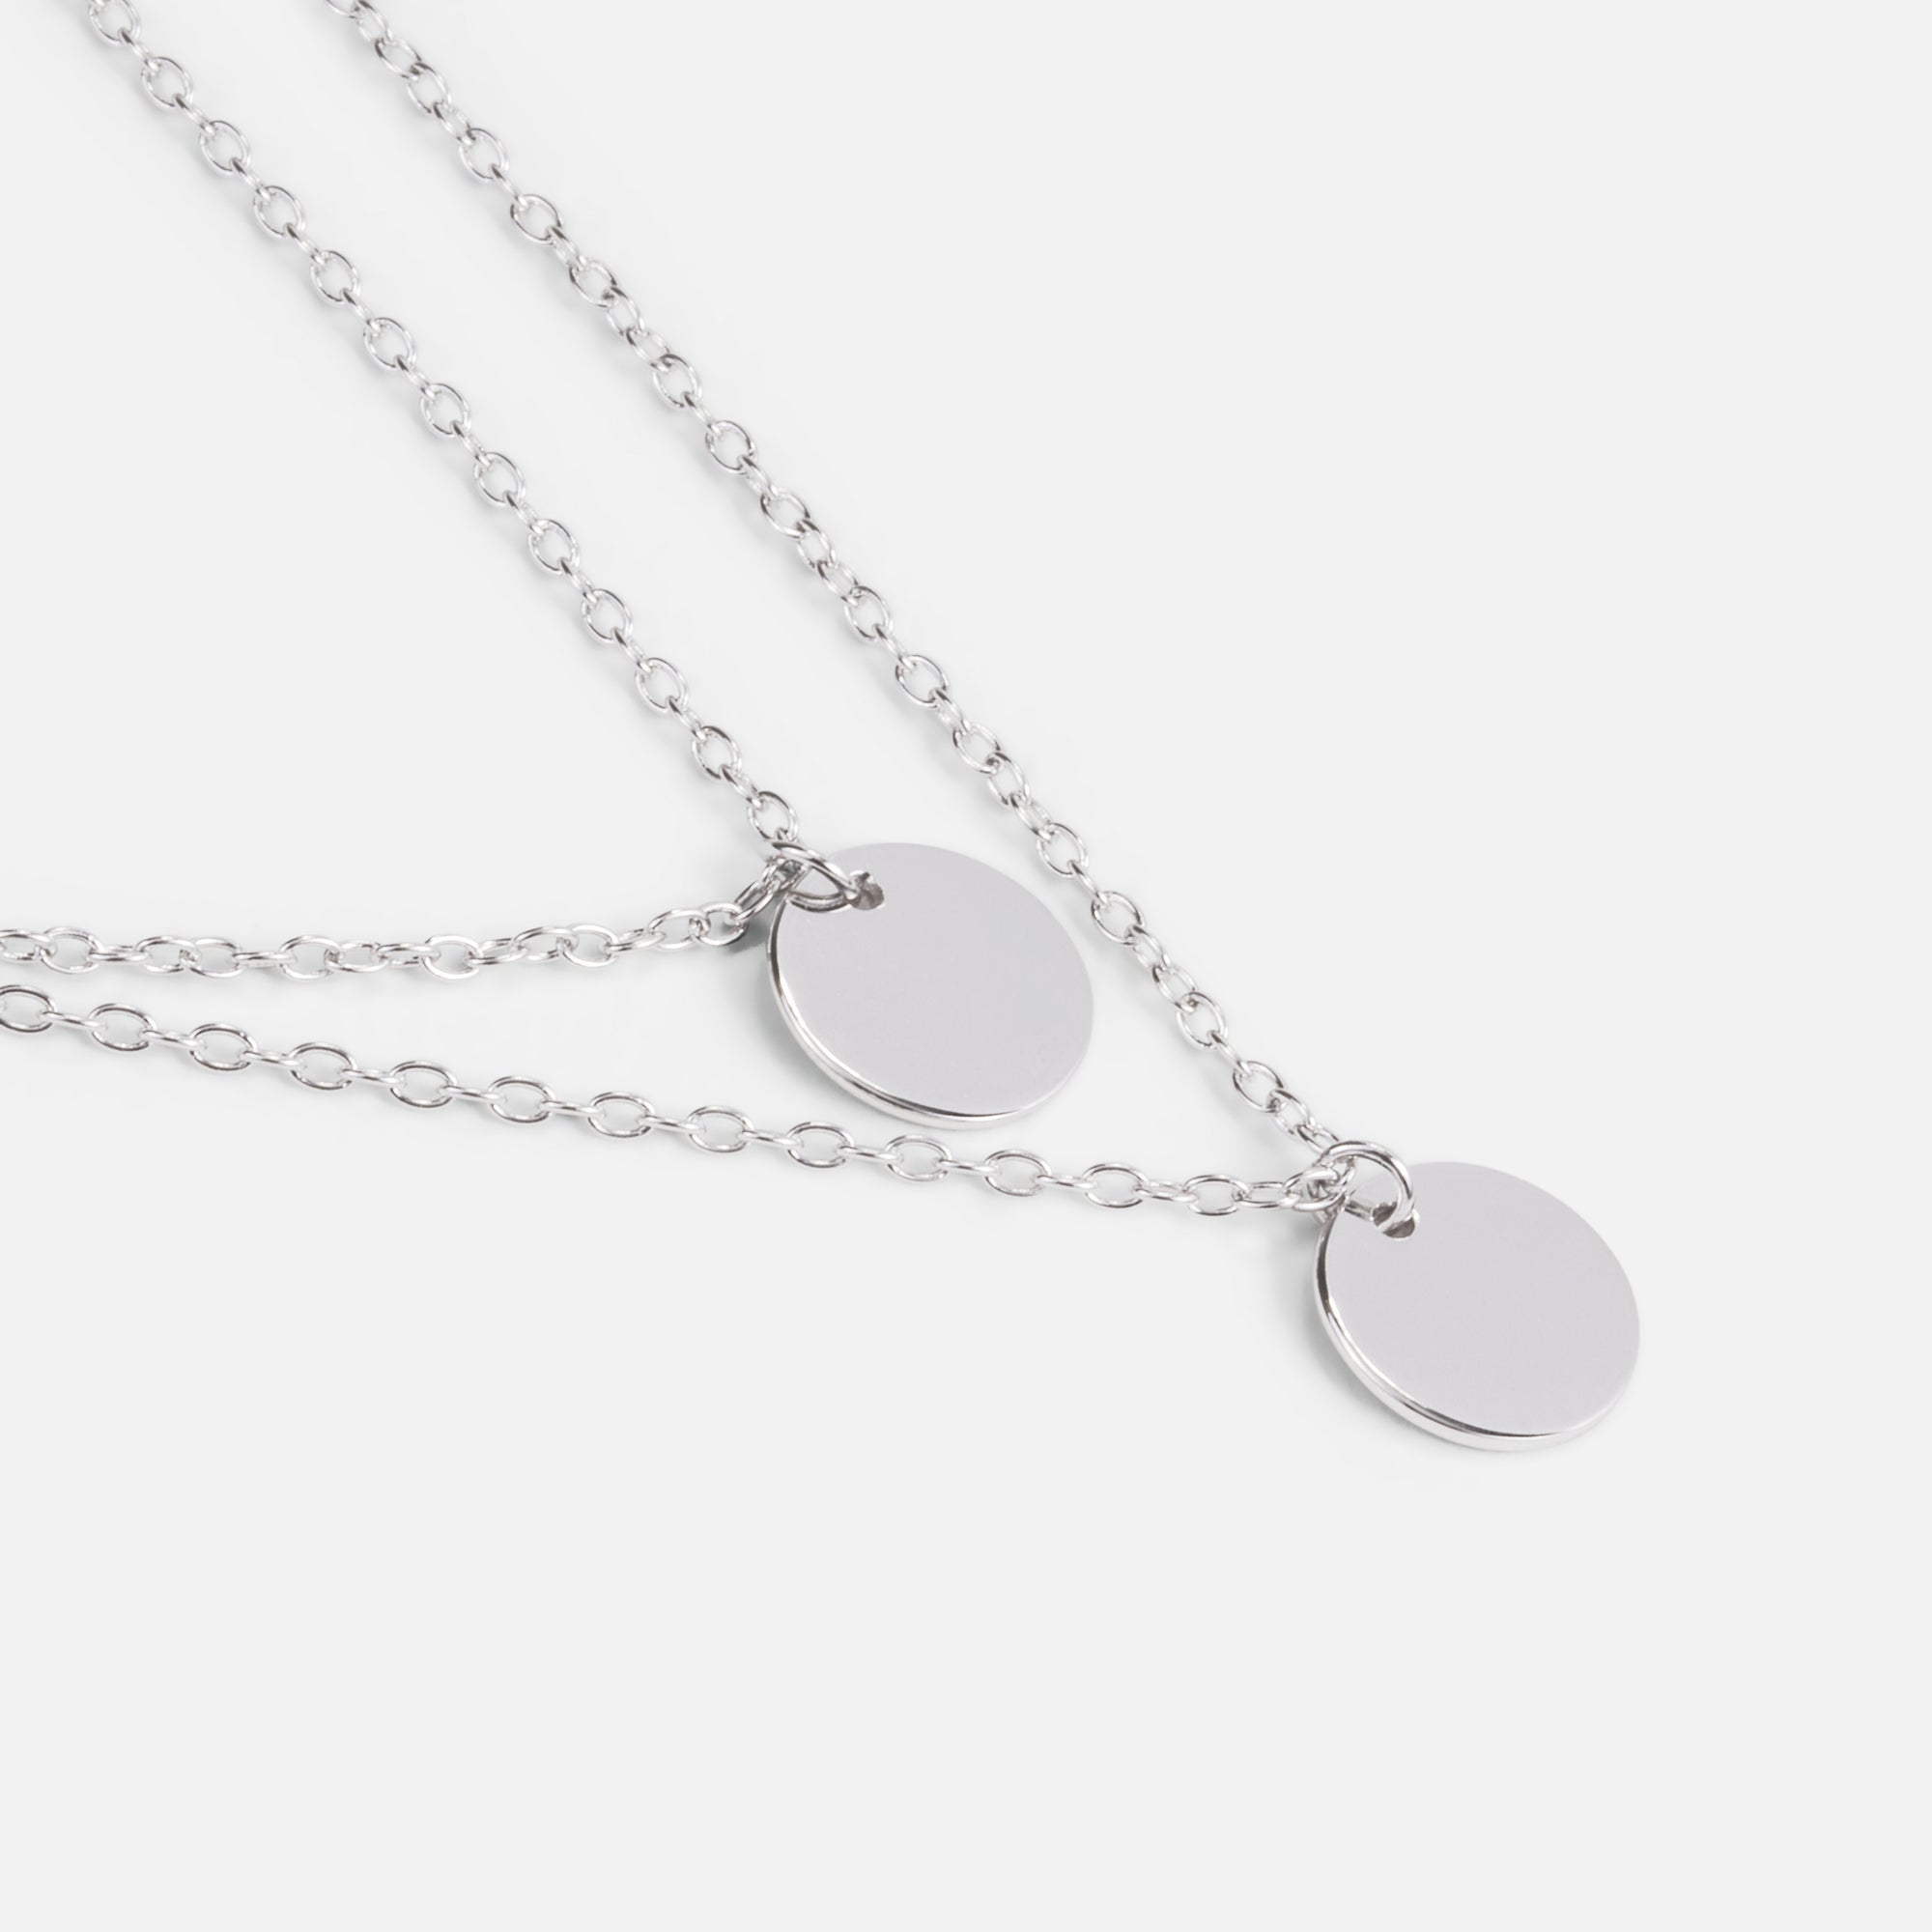 Sterling silver double necklace